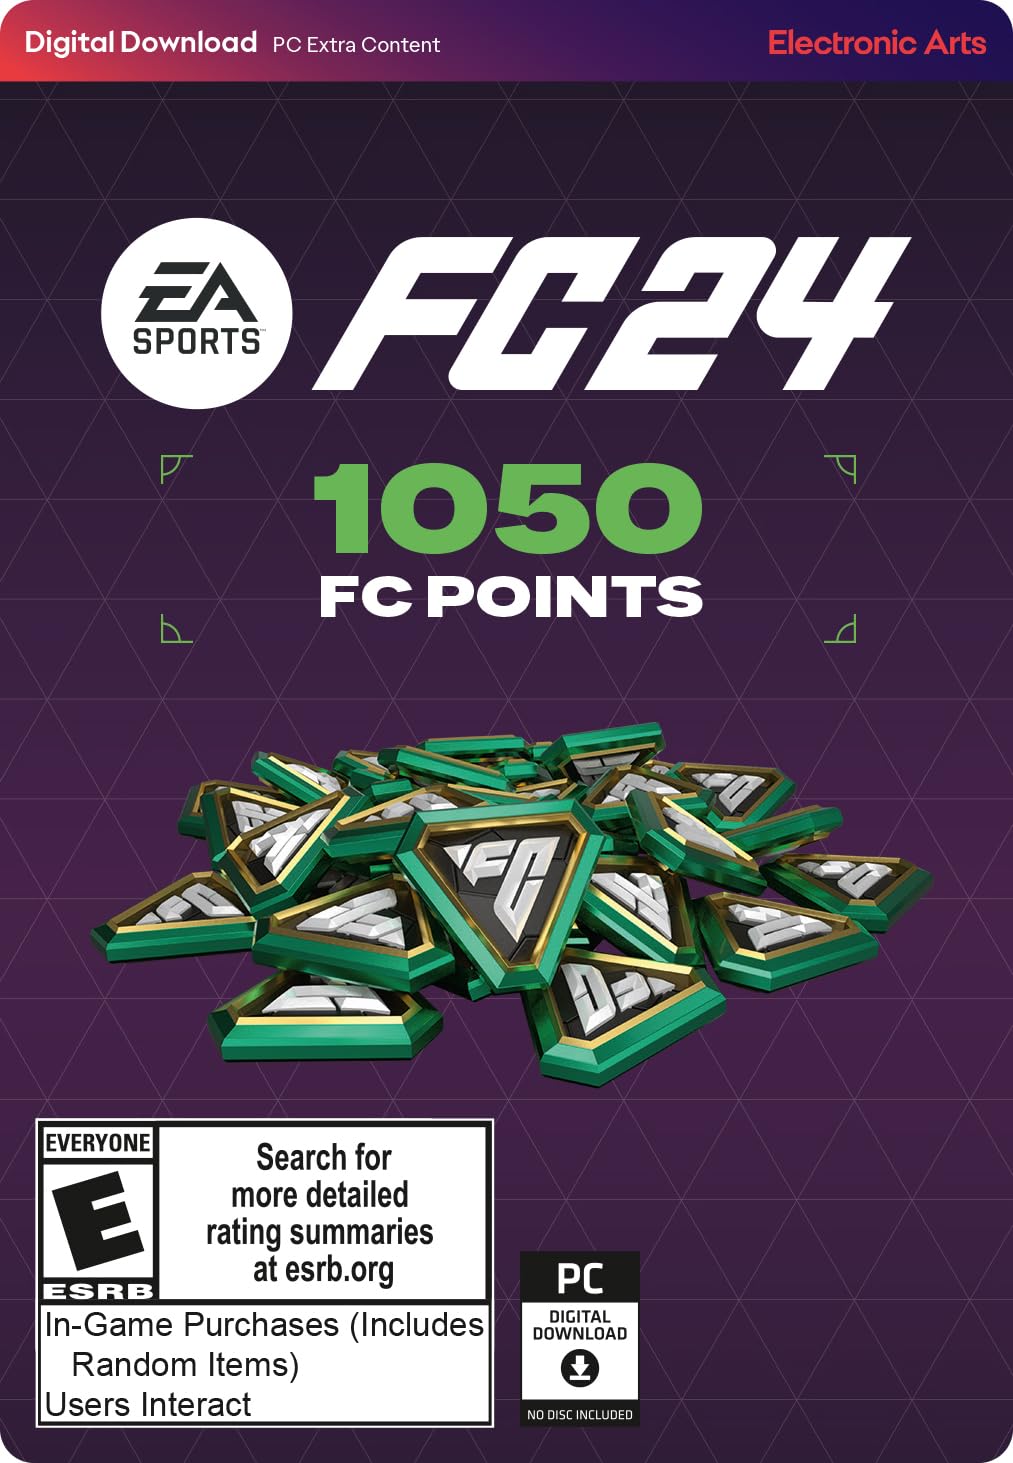 EA SPORTS FC 24 - 1050 Points - PC [Online Game Code]